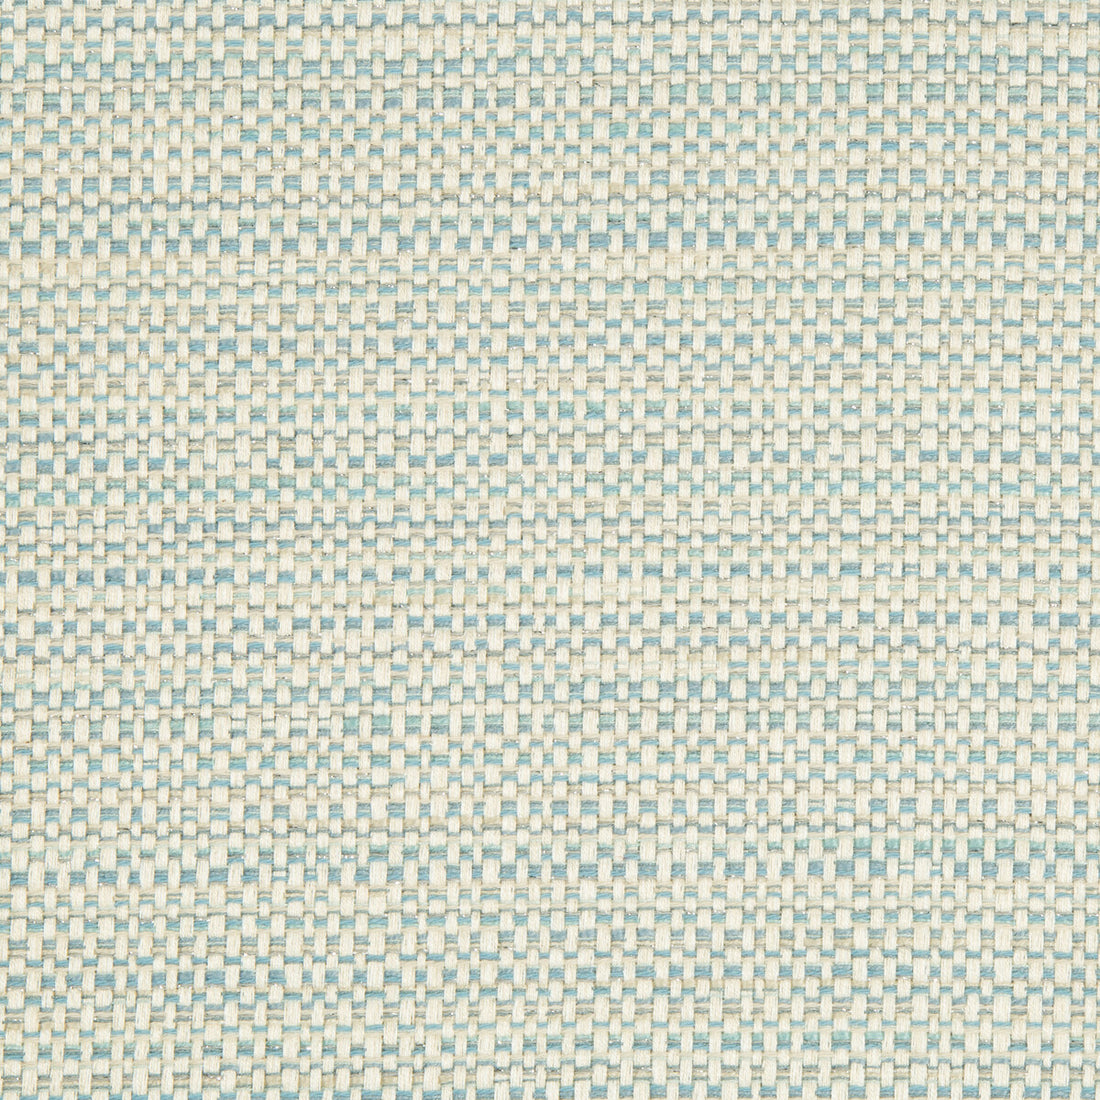 Kravet Design fabric in 34683-15 color - pattern 34683.15.0 - by Kravet Design in the Crypton Home collection